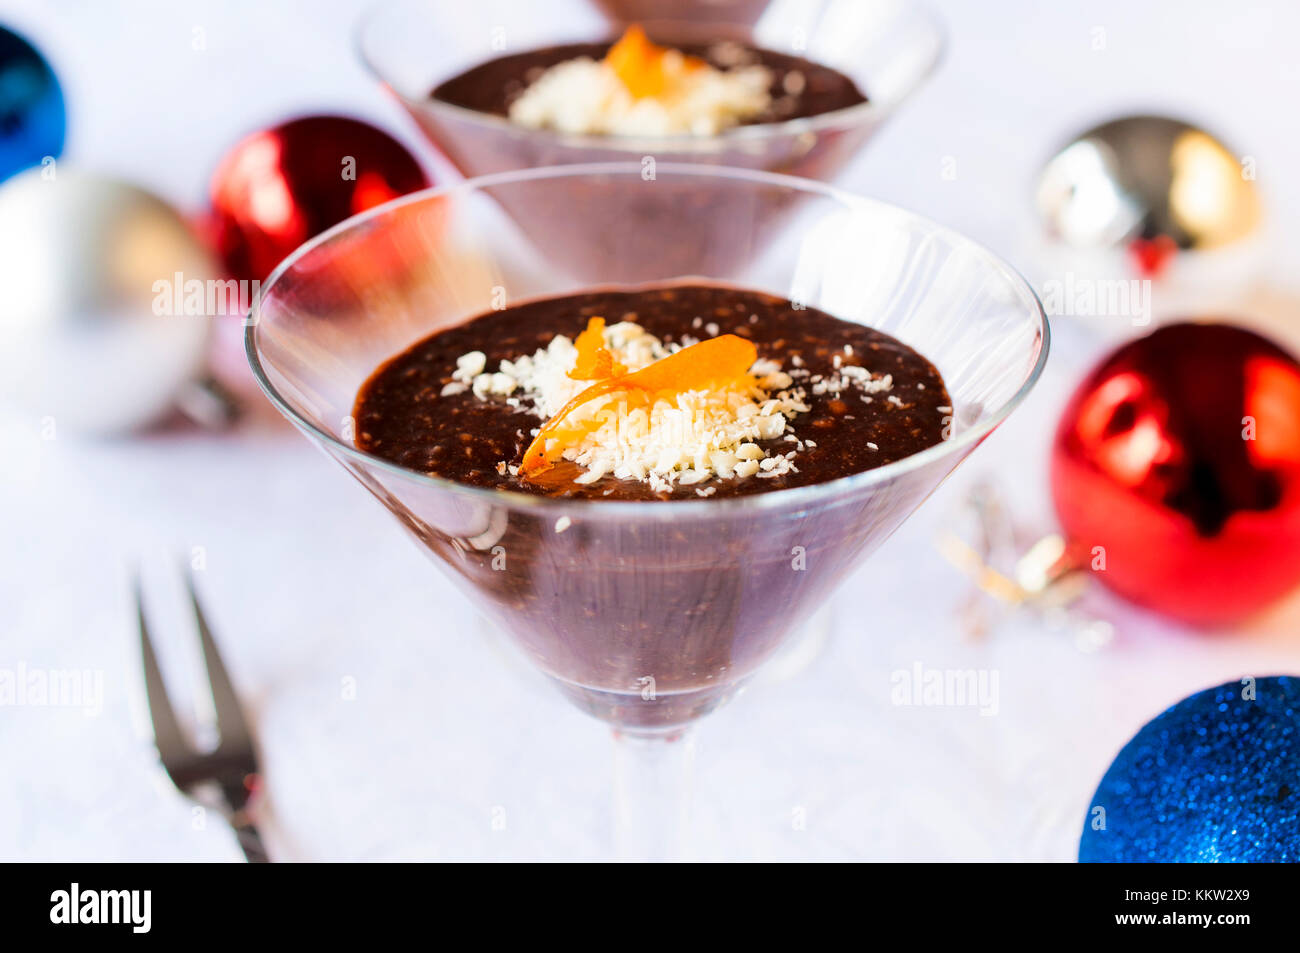 Sweet dark and white chocolate dessert with the crushed nuts Stock Photo